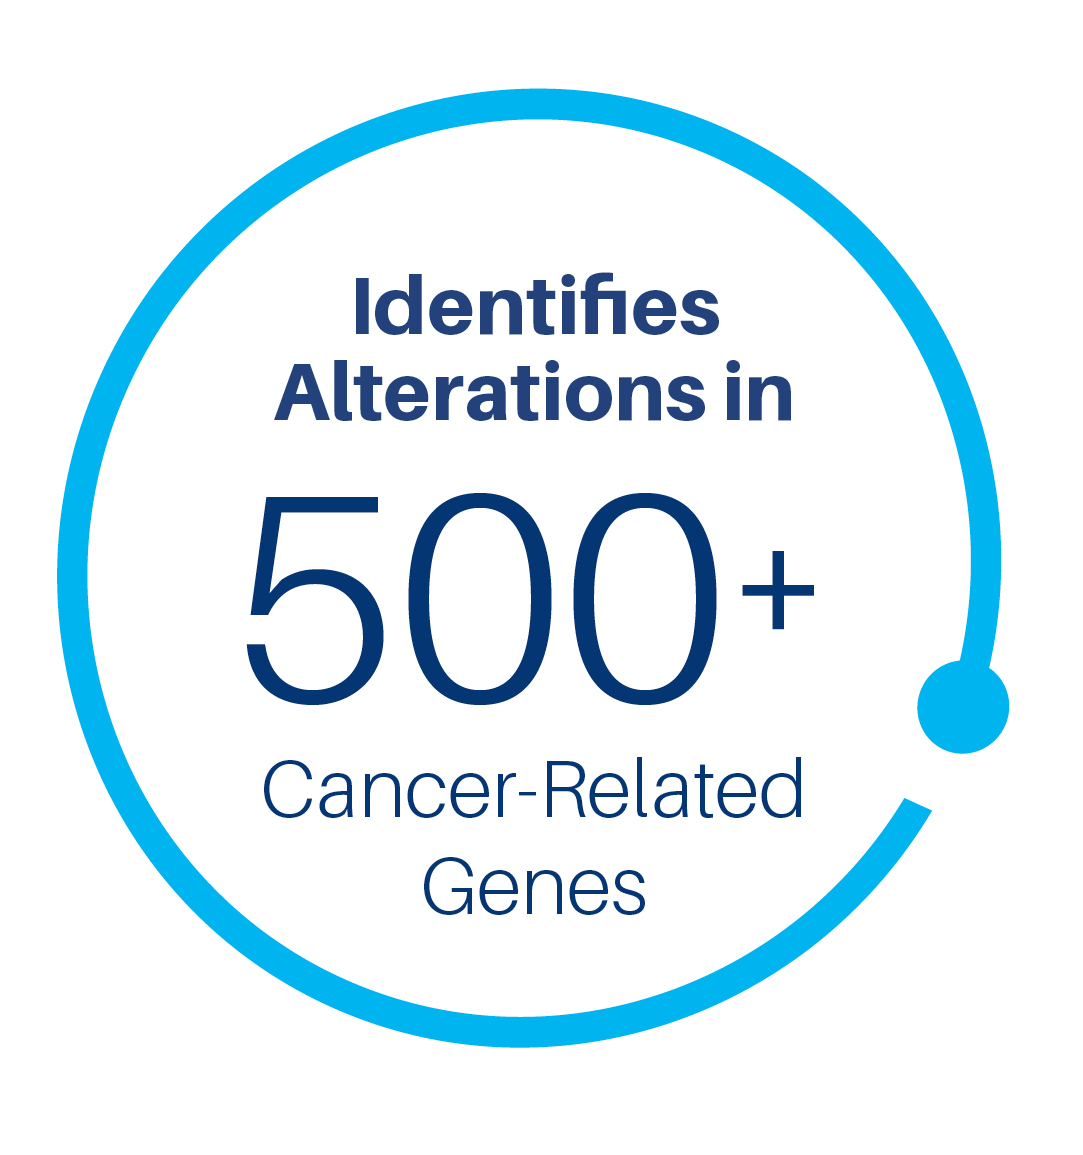 Identifies alterations in 500+ cancer-related genes